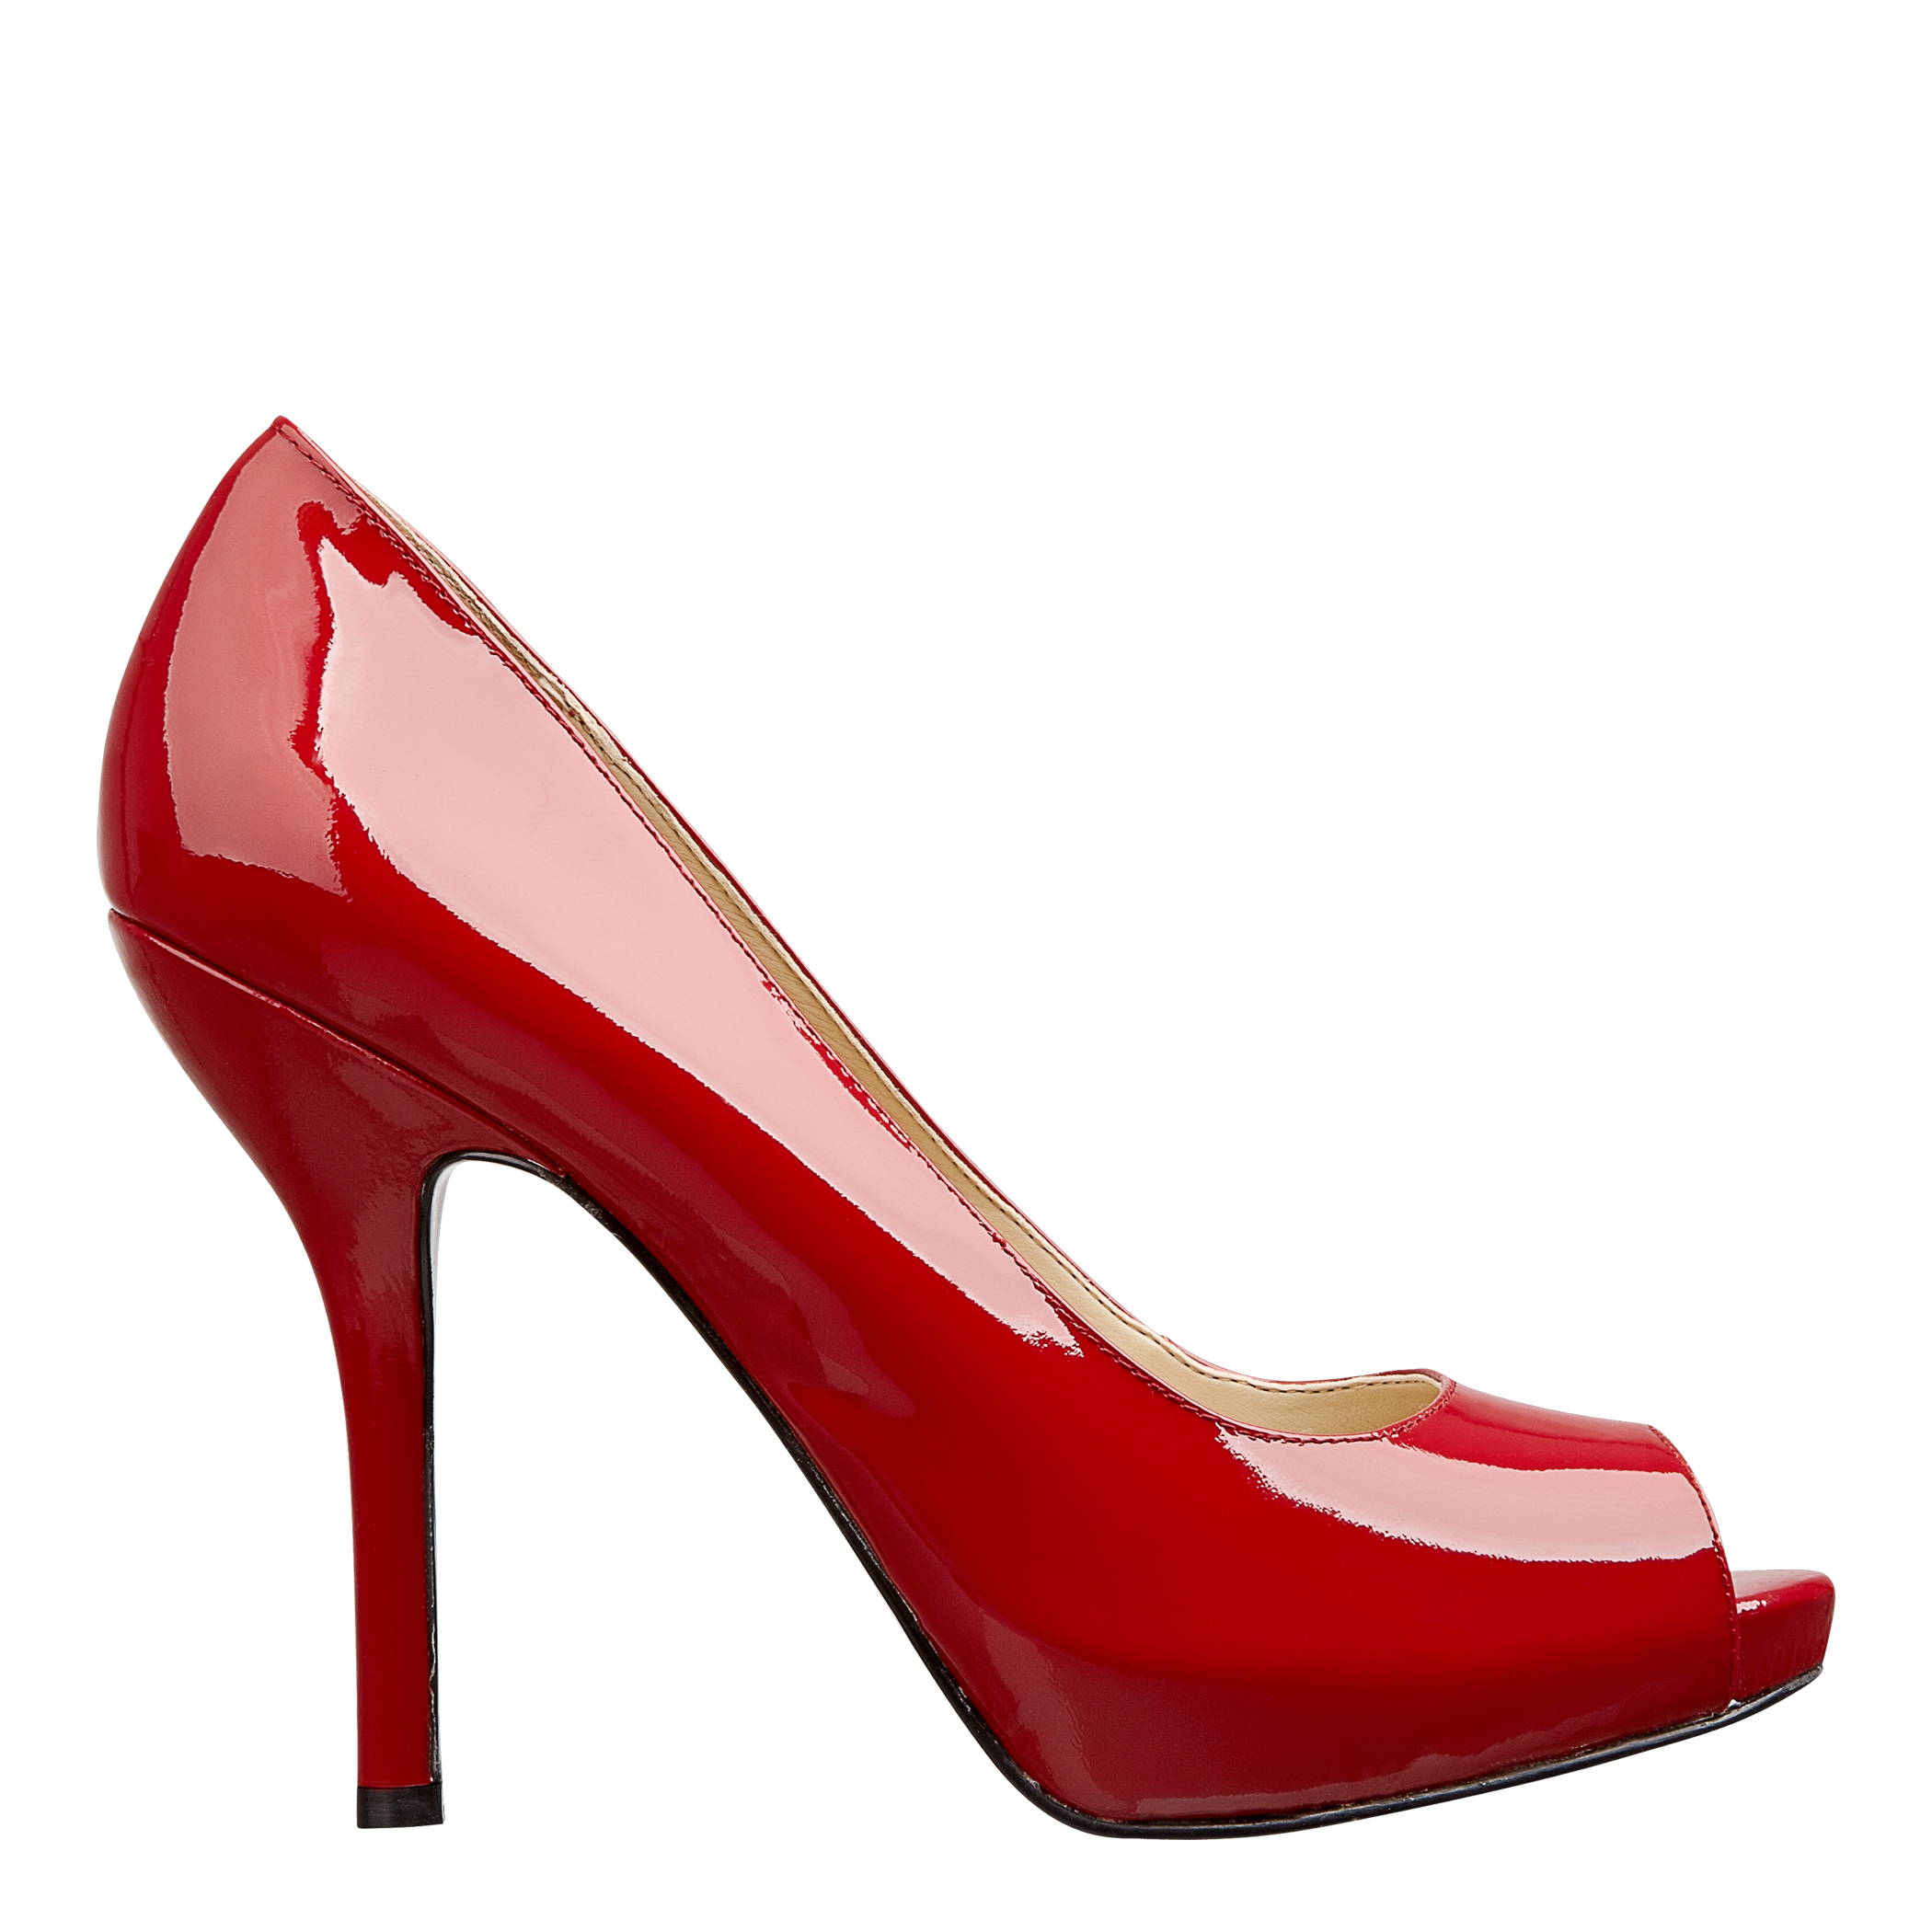 Nine West Flute Peep Toe Pump in Red (RED PATENT LEATHER) | Lyst